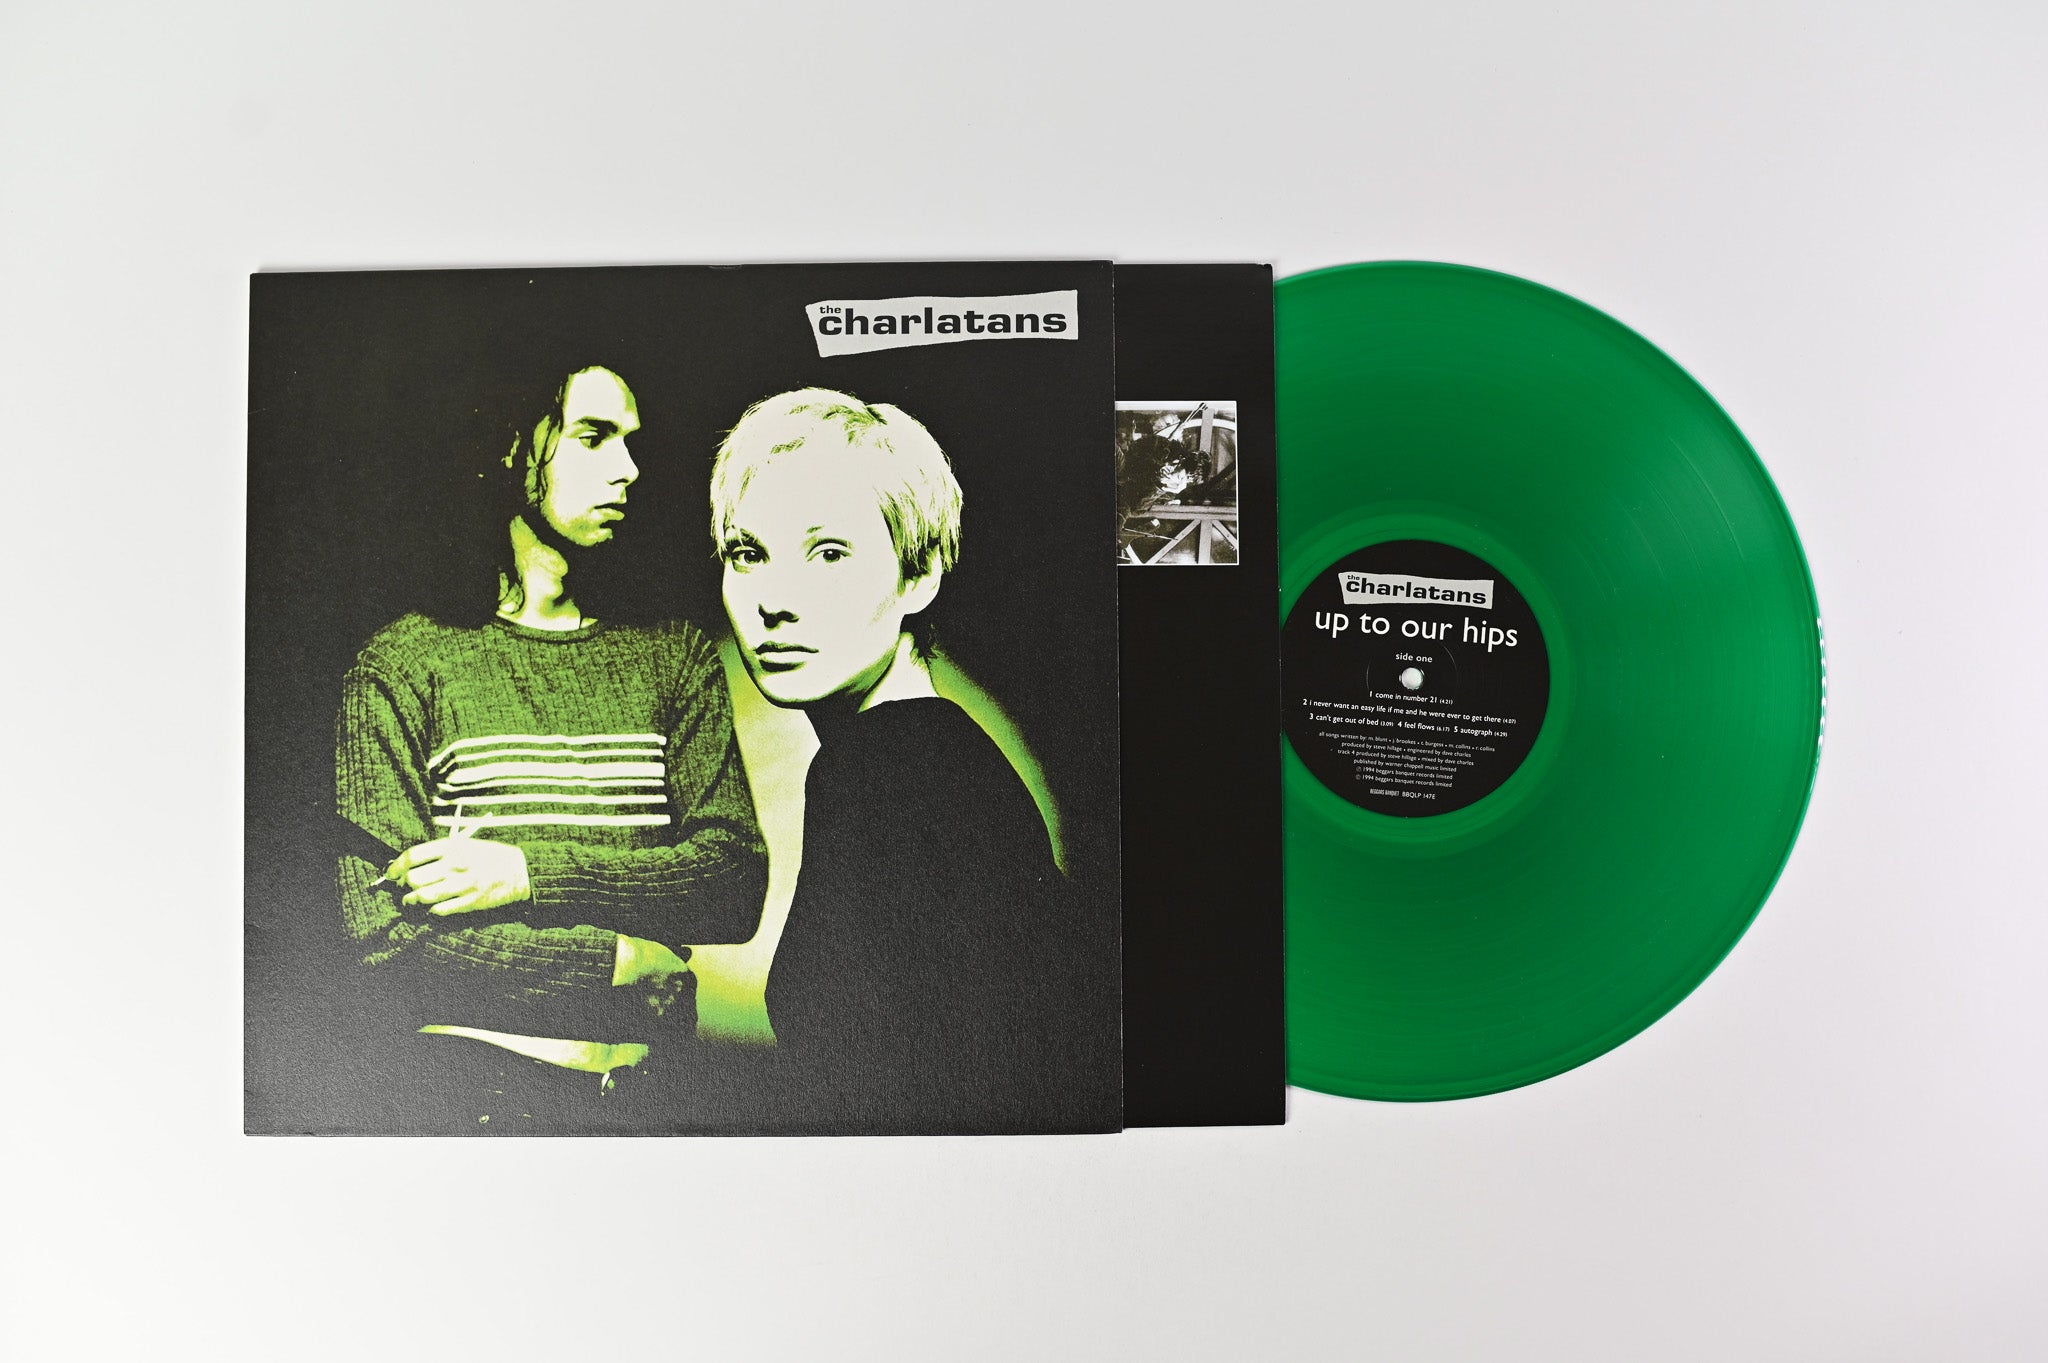 The Charlatans - Up To Our Hips on Beggars Banquet Ltd Green Reissue